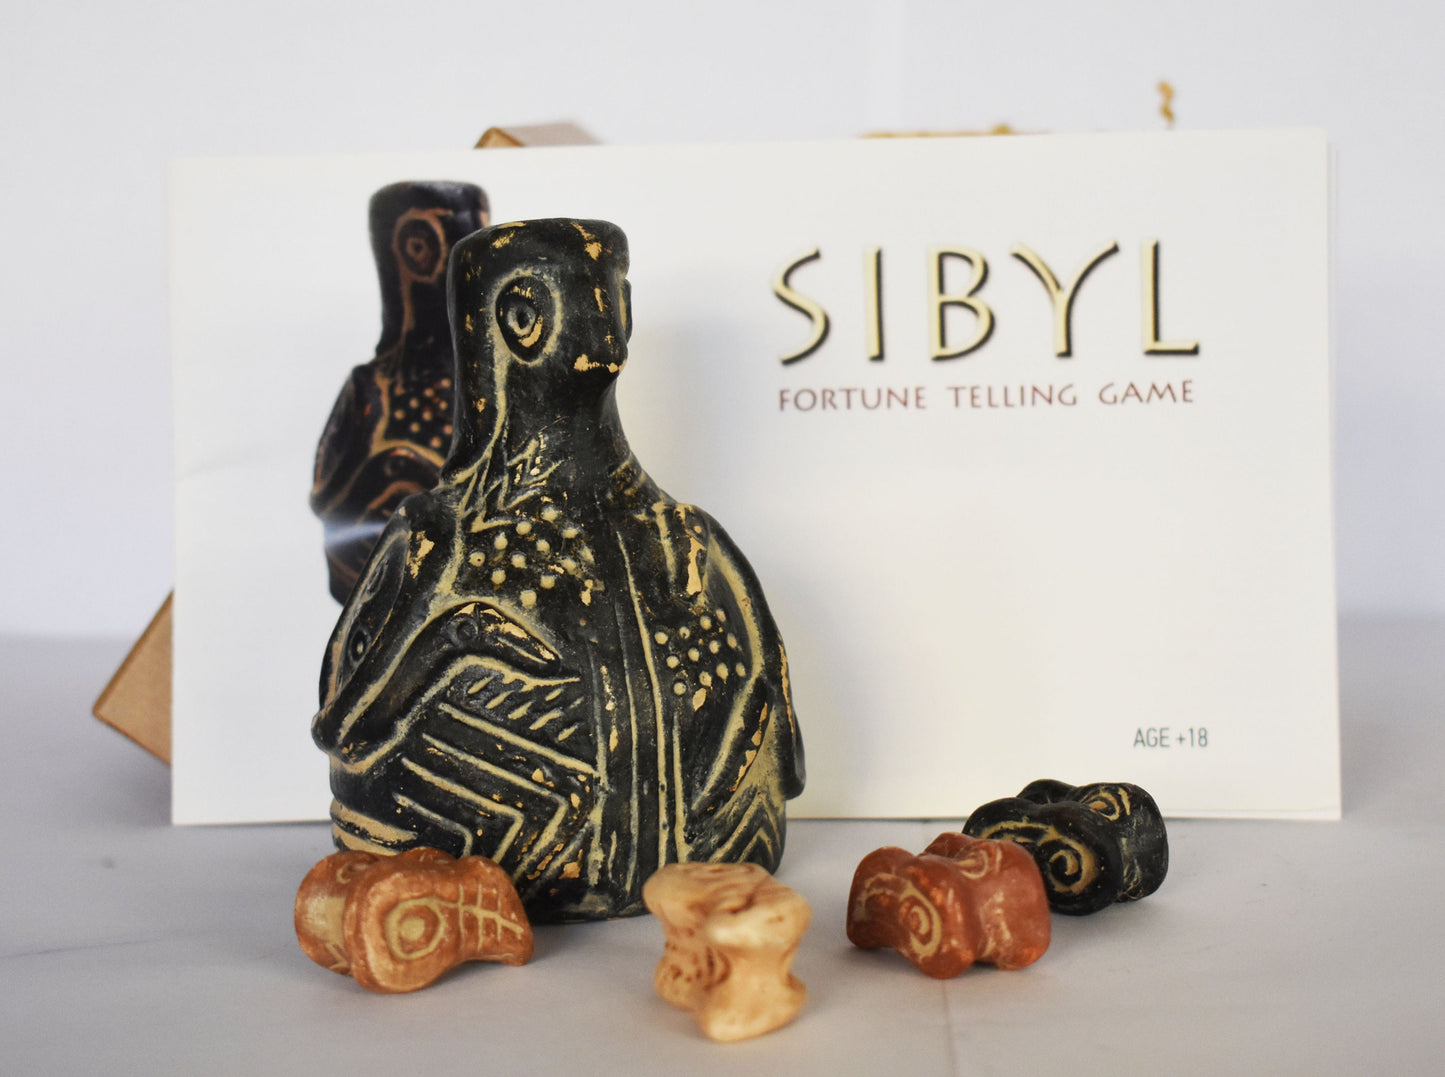 Sibyl - Fortune Telling Game - Inspired by Ancient Greek History and Mythology - With Instructions for Use - Ceramic Artifact